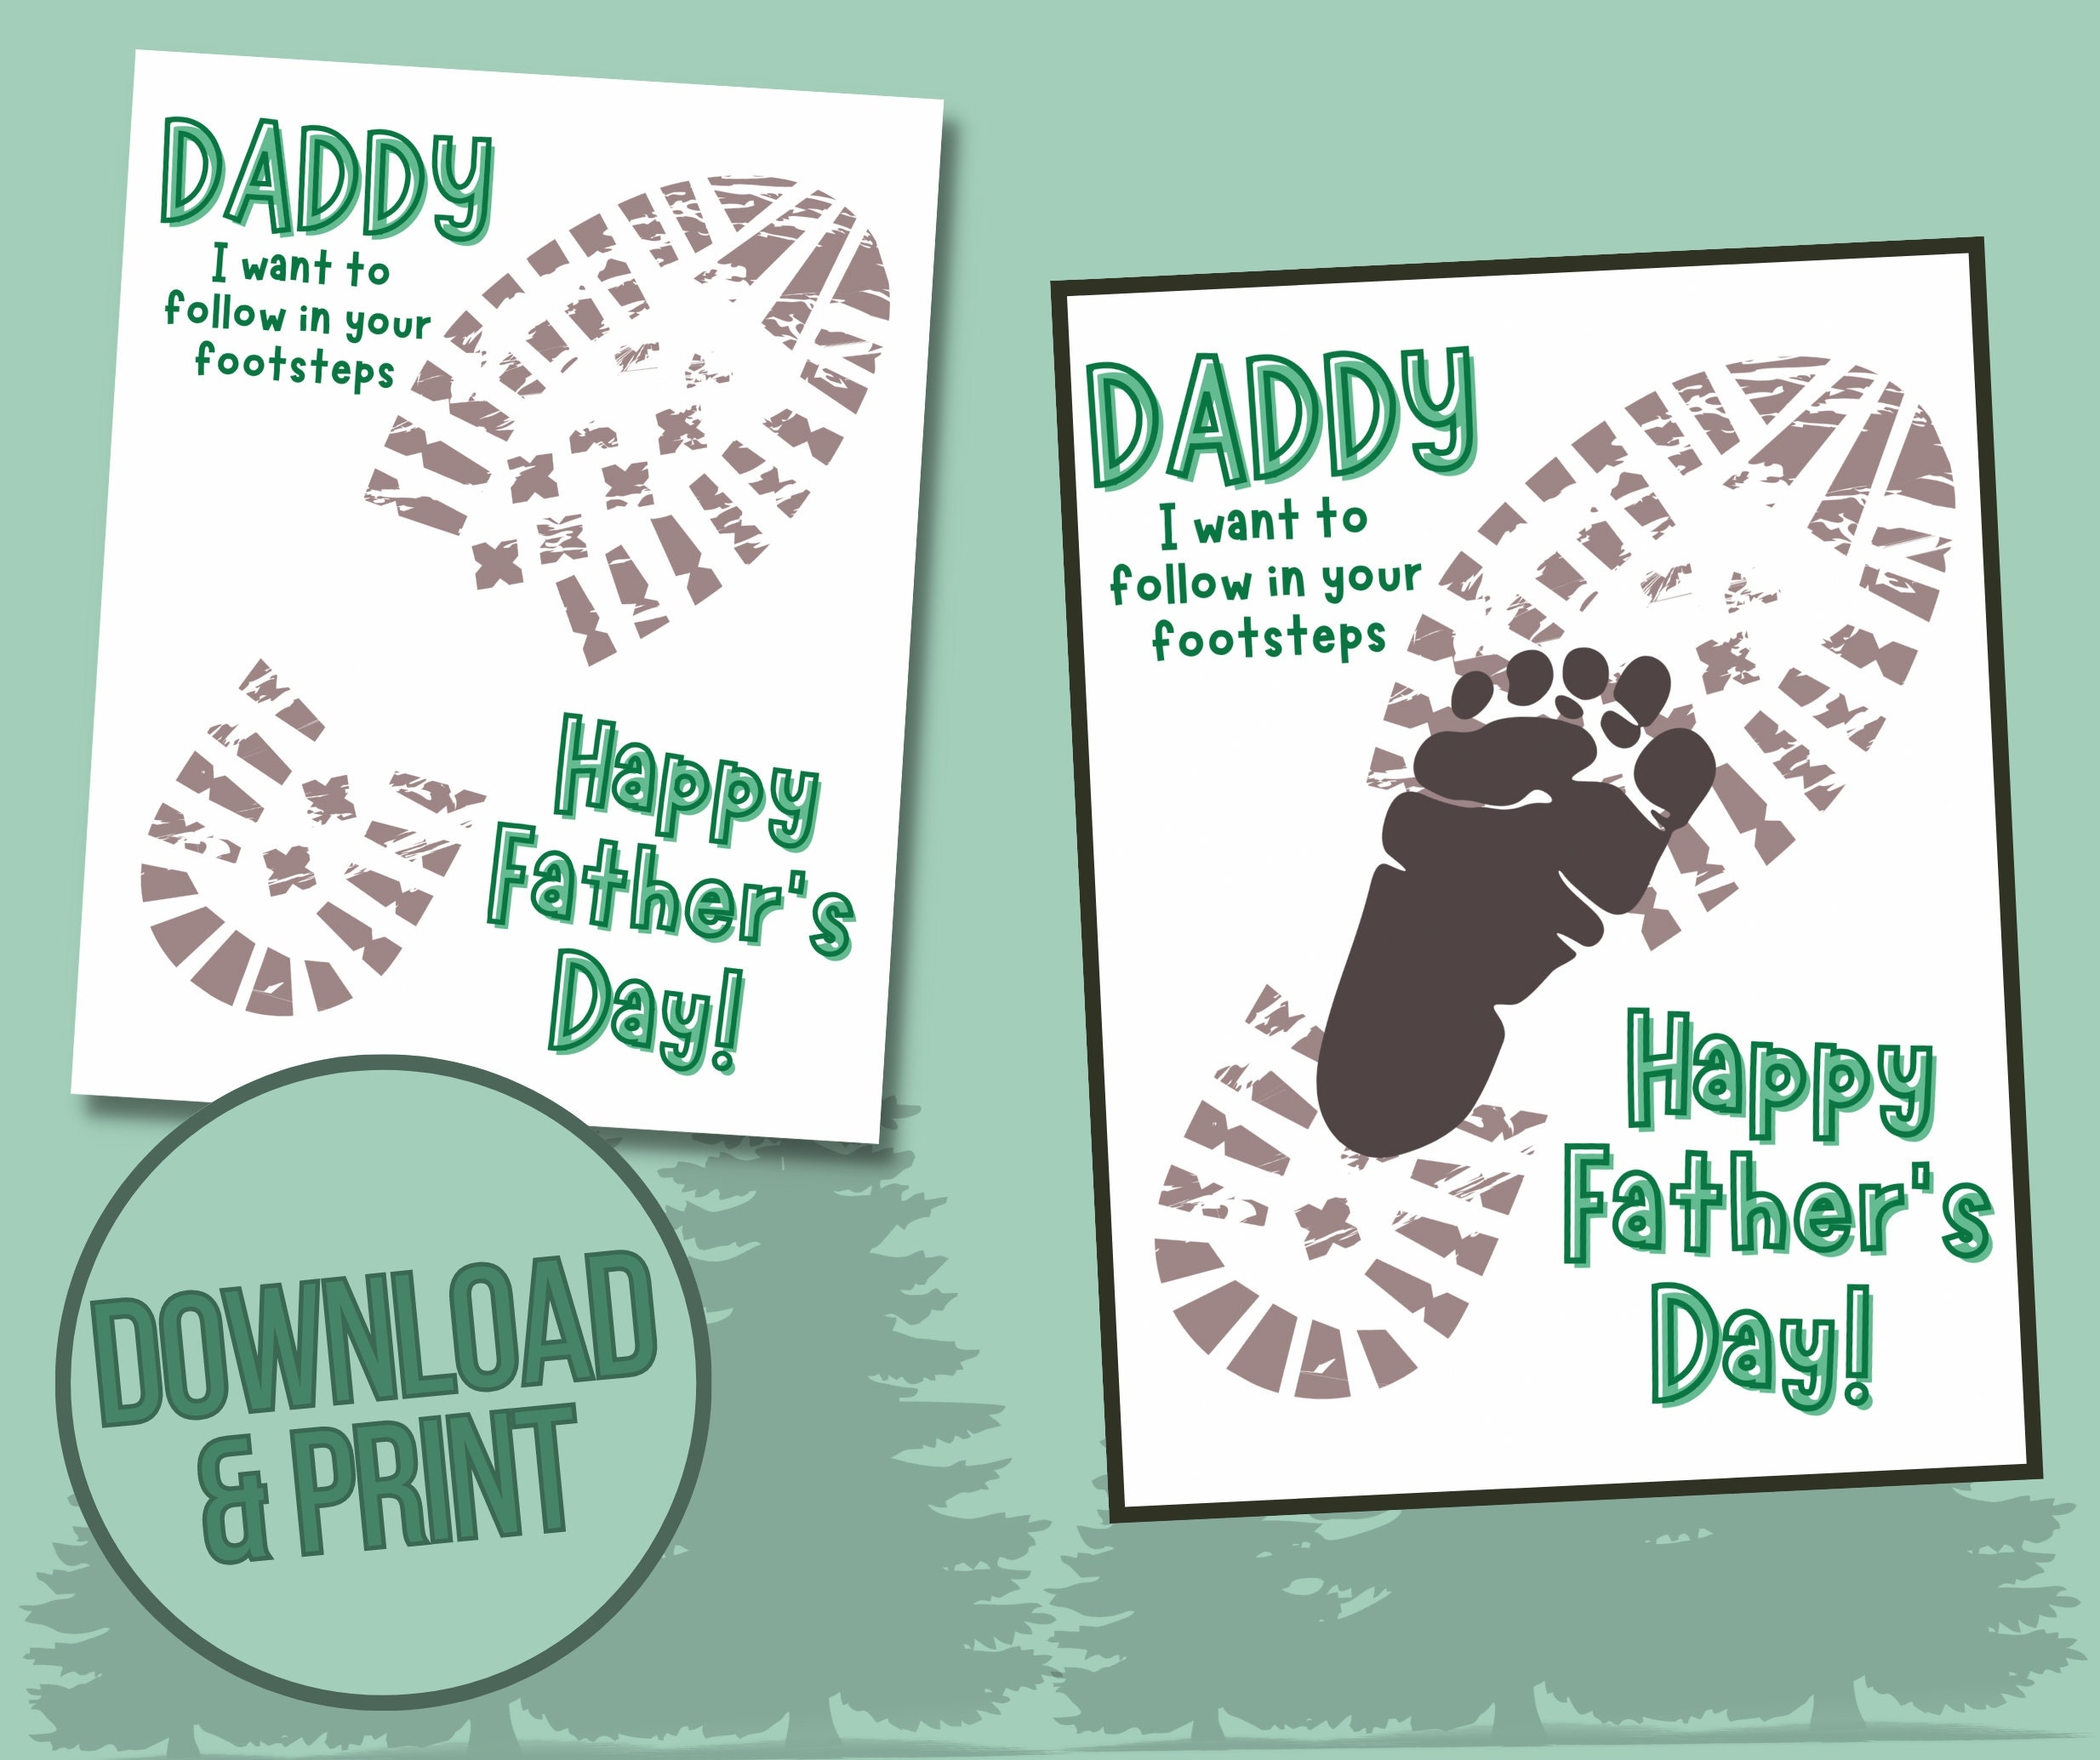 Daddy s Footsteps Printable Download Print Daddy Father s Day Boots Kids Craft Gifts Kids Baby Toddler DIY Footprint Art Etsy